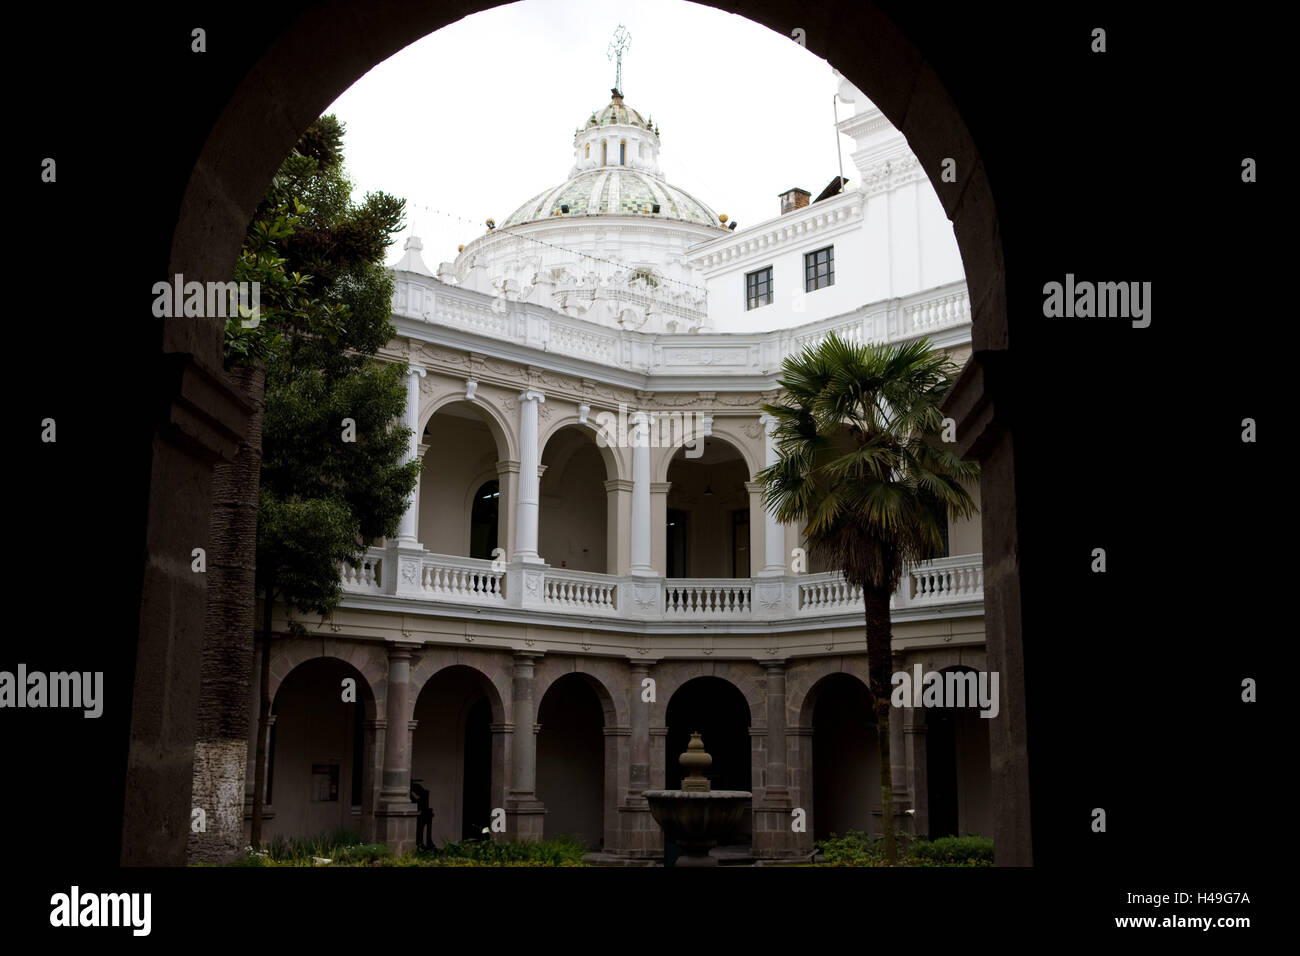 Ecuador, province Pichincha, Quito, plaza de la Independencia, presidential palace, detail, South America, town, capital, architecture, building, structure, inner courtyard, church, cathedral, steeple, place of interest, Stock Photo